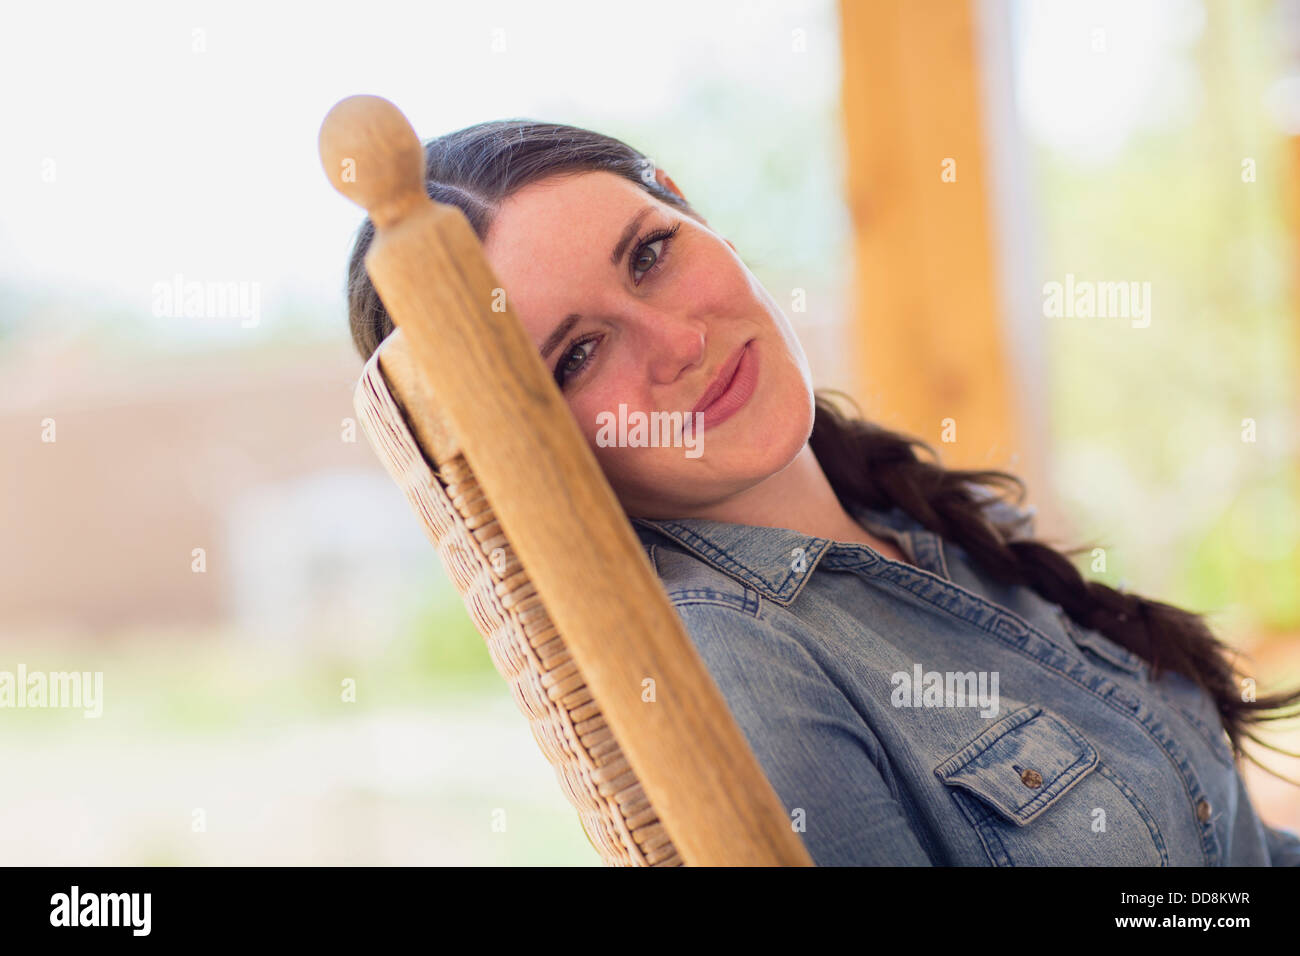 Caucasian woman relaxing in rocking chair Banque D'Images